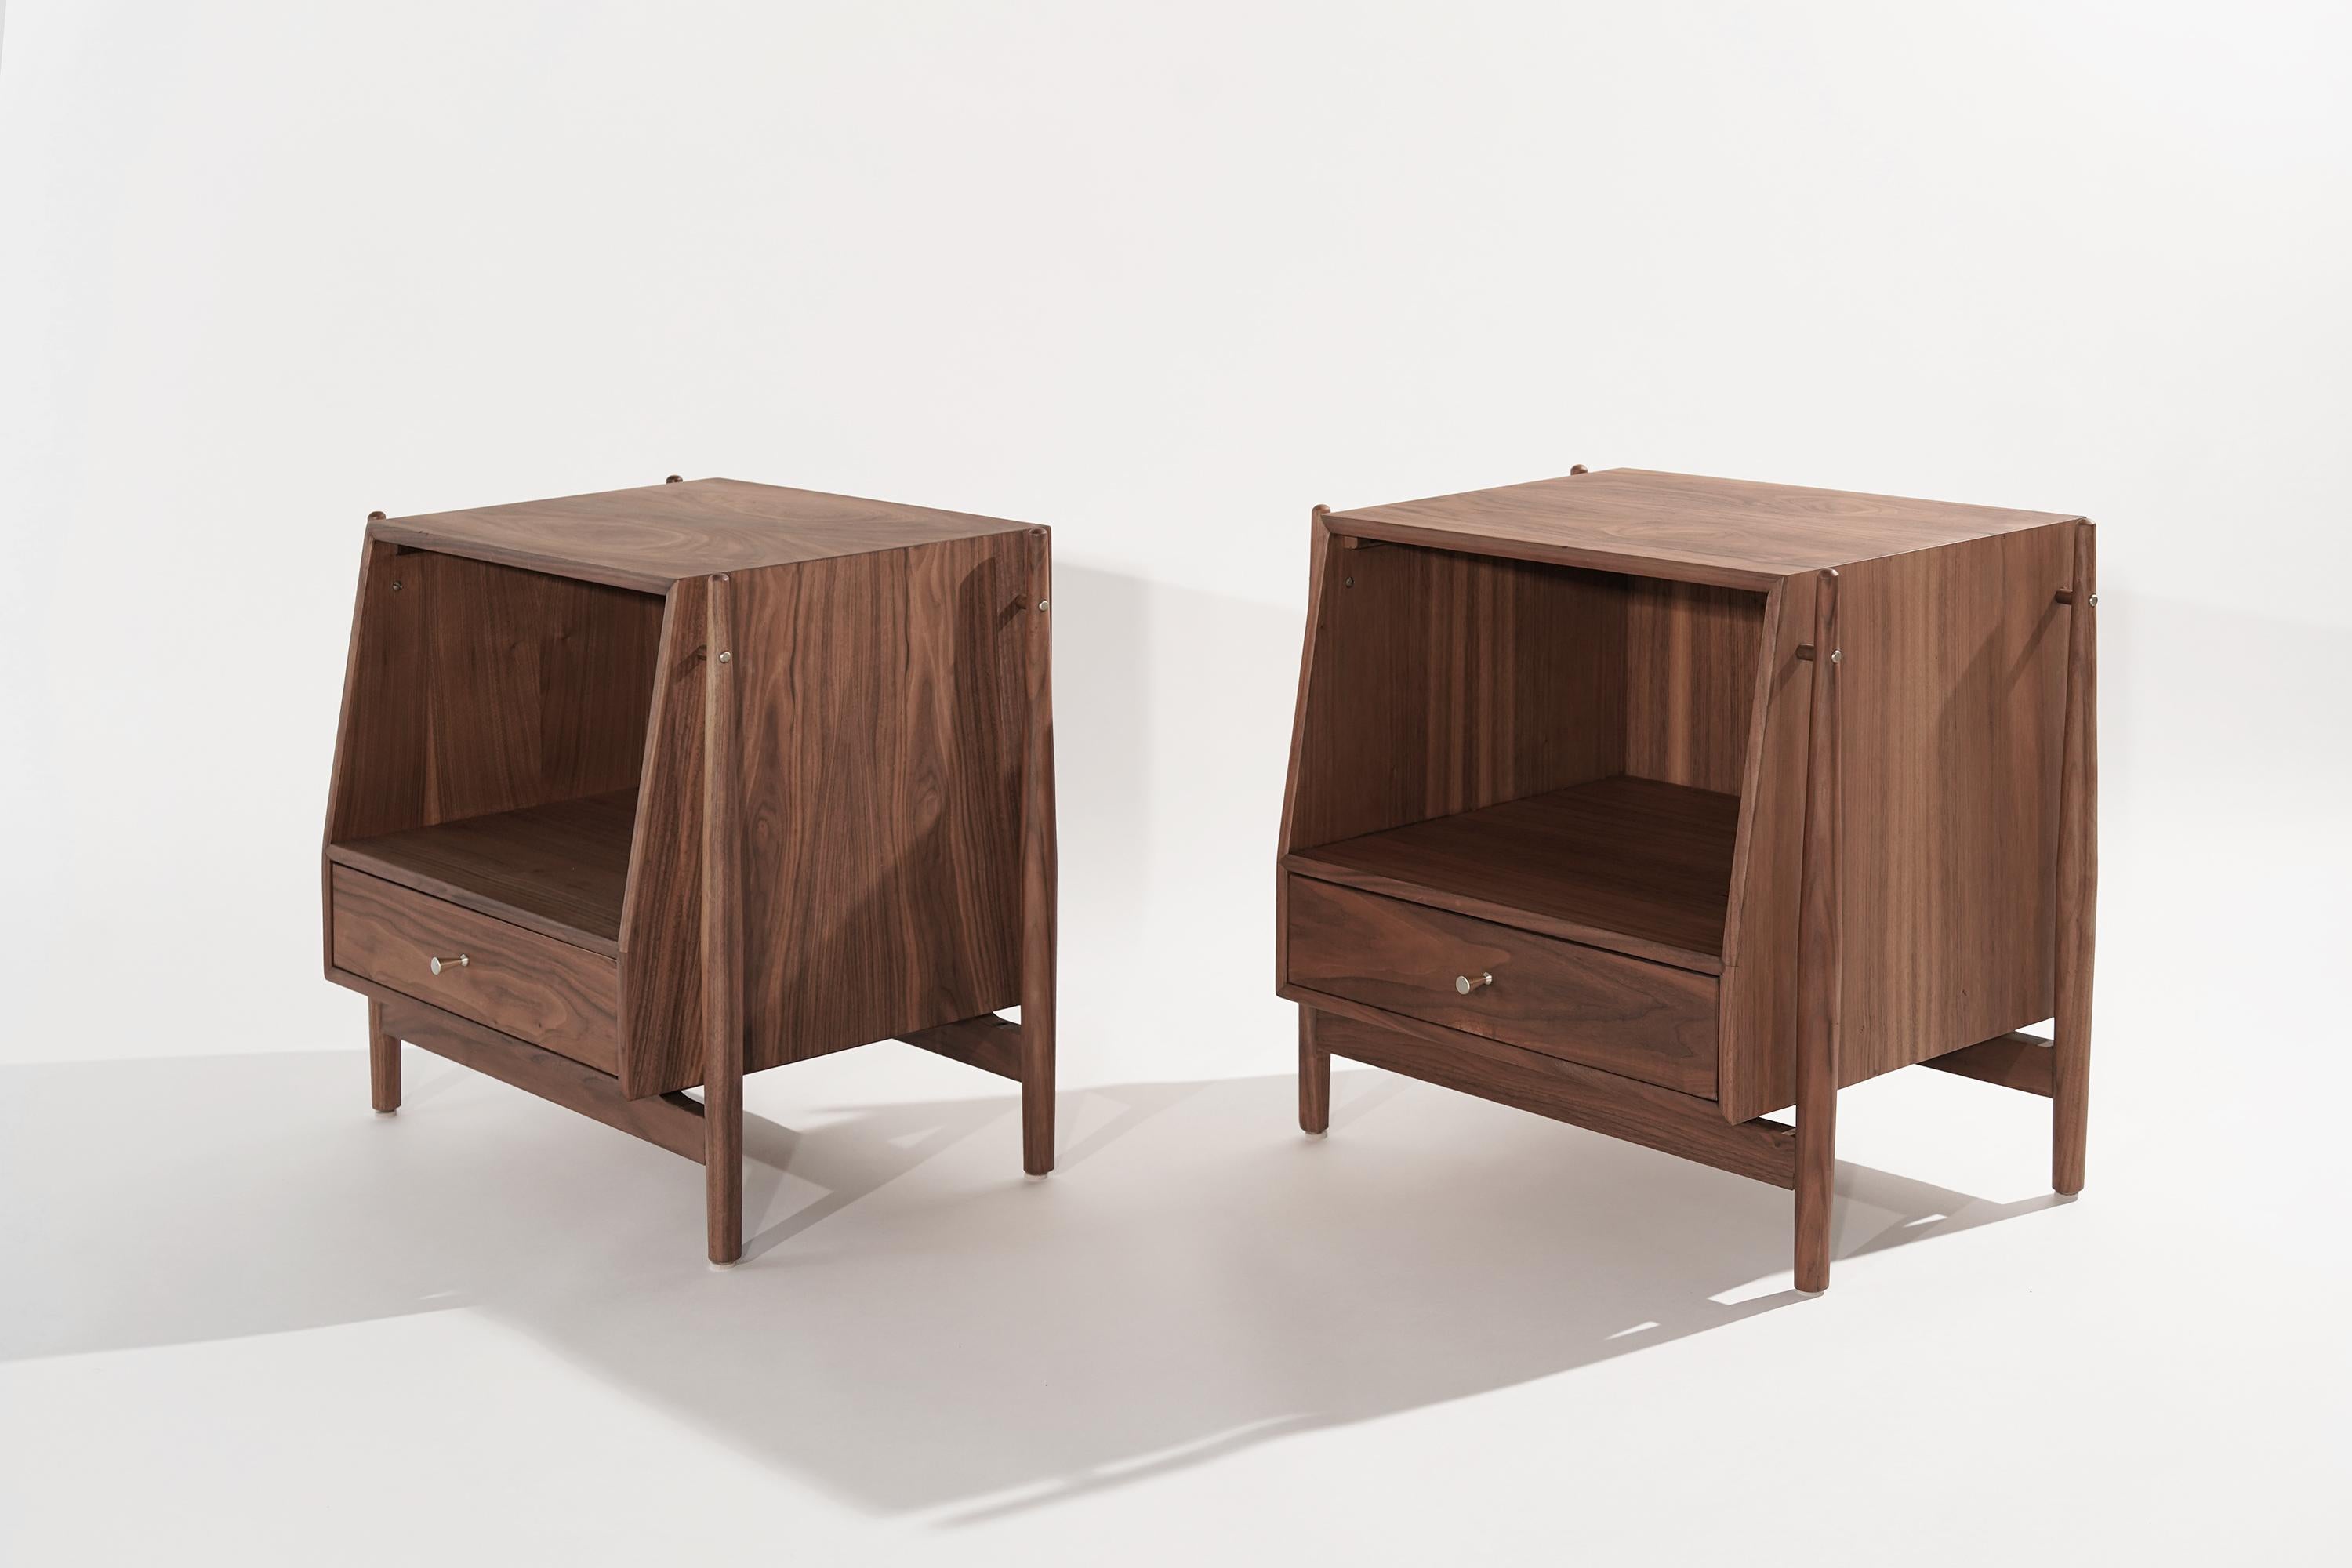 A fully restored pair of end tables or bedside tables designed by Kipp Stewart, circa 1950s. Exposed walnut framework, featuring our organic matte finish.

Other designers of the period include Vladimir Kagan, Paul McCobb, Hans Wegner, Gio Ponti,